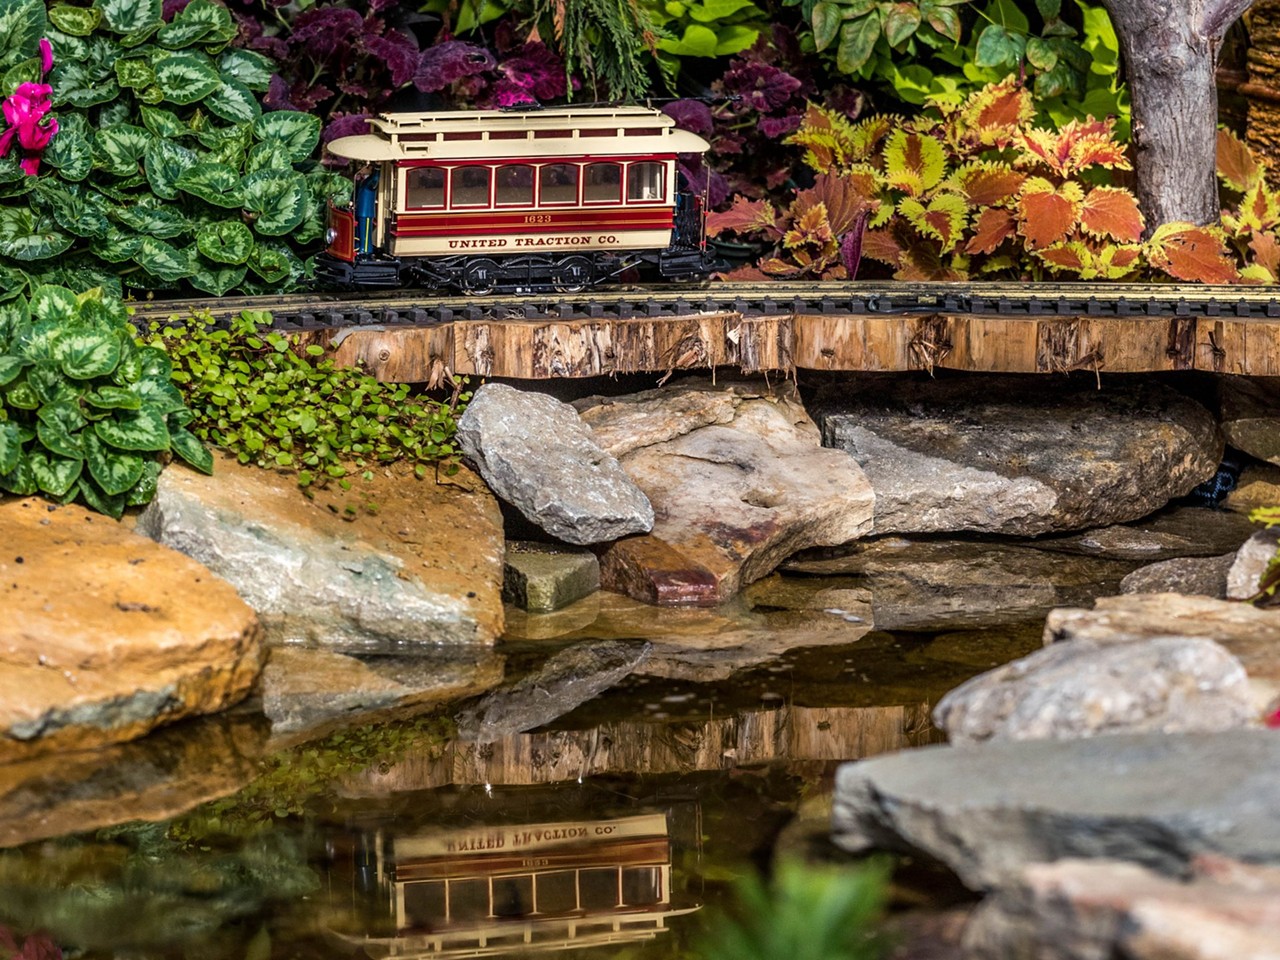 See Inside Krohn Conservatory's Holiday Floral Show 'Trains and Traditions, a Cincinnati Holiday'